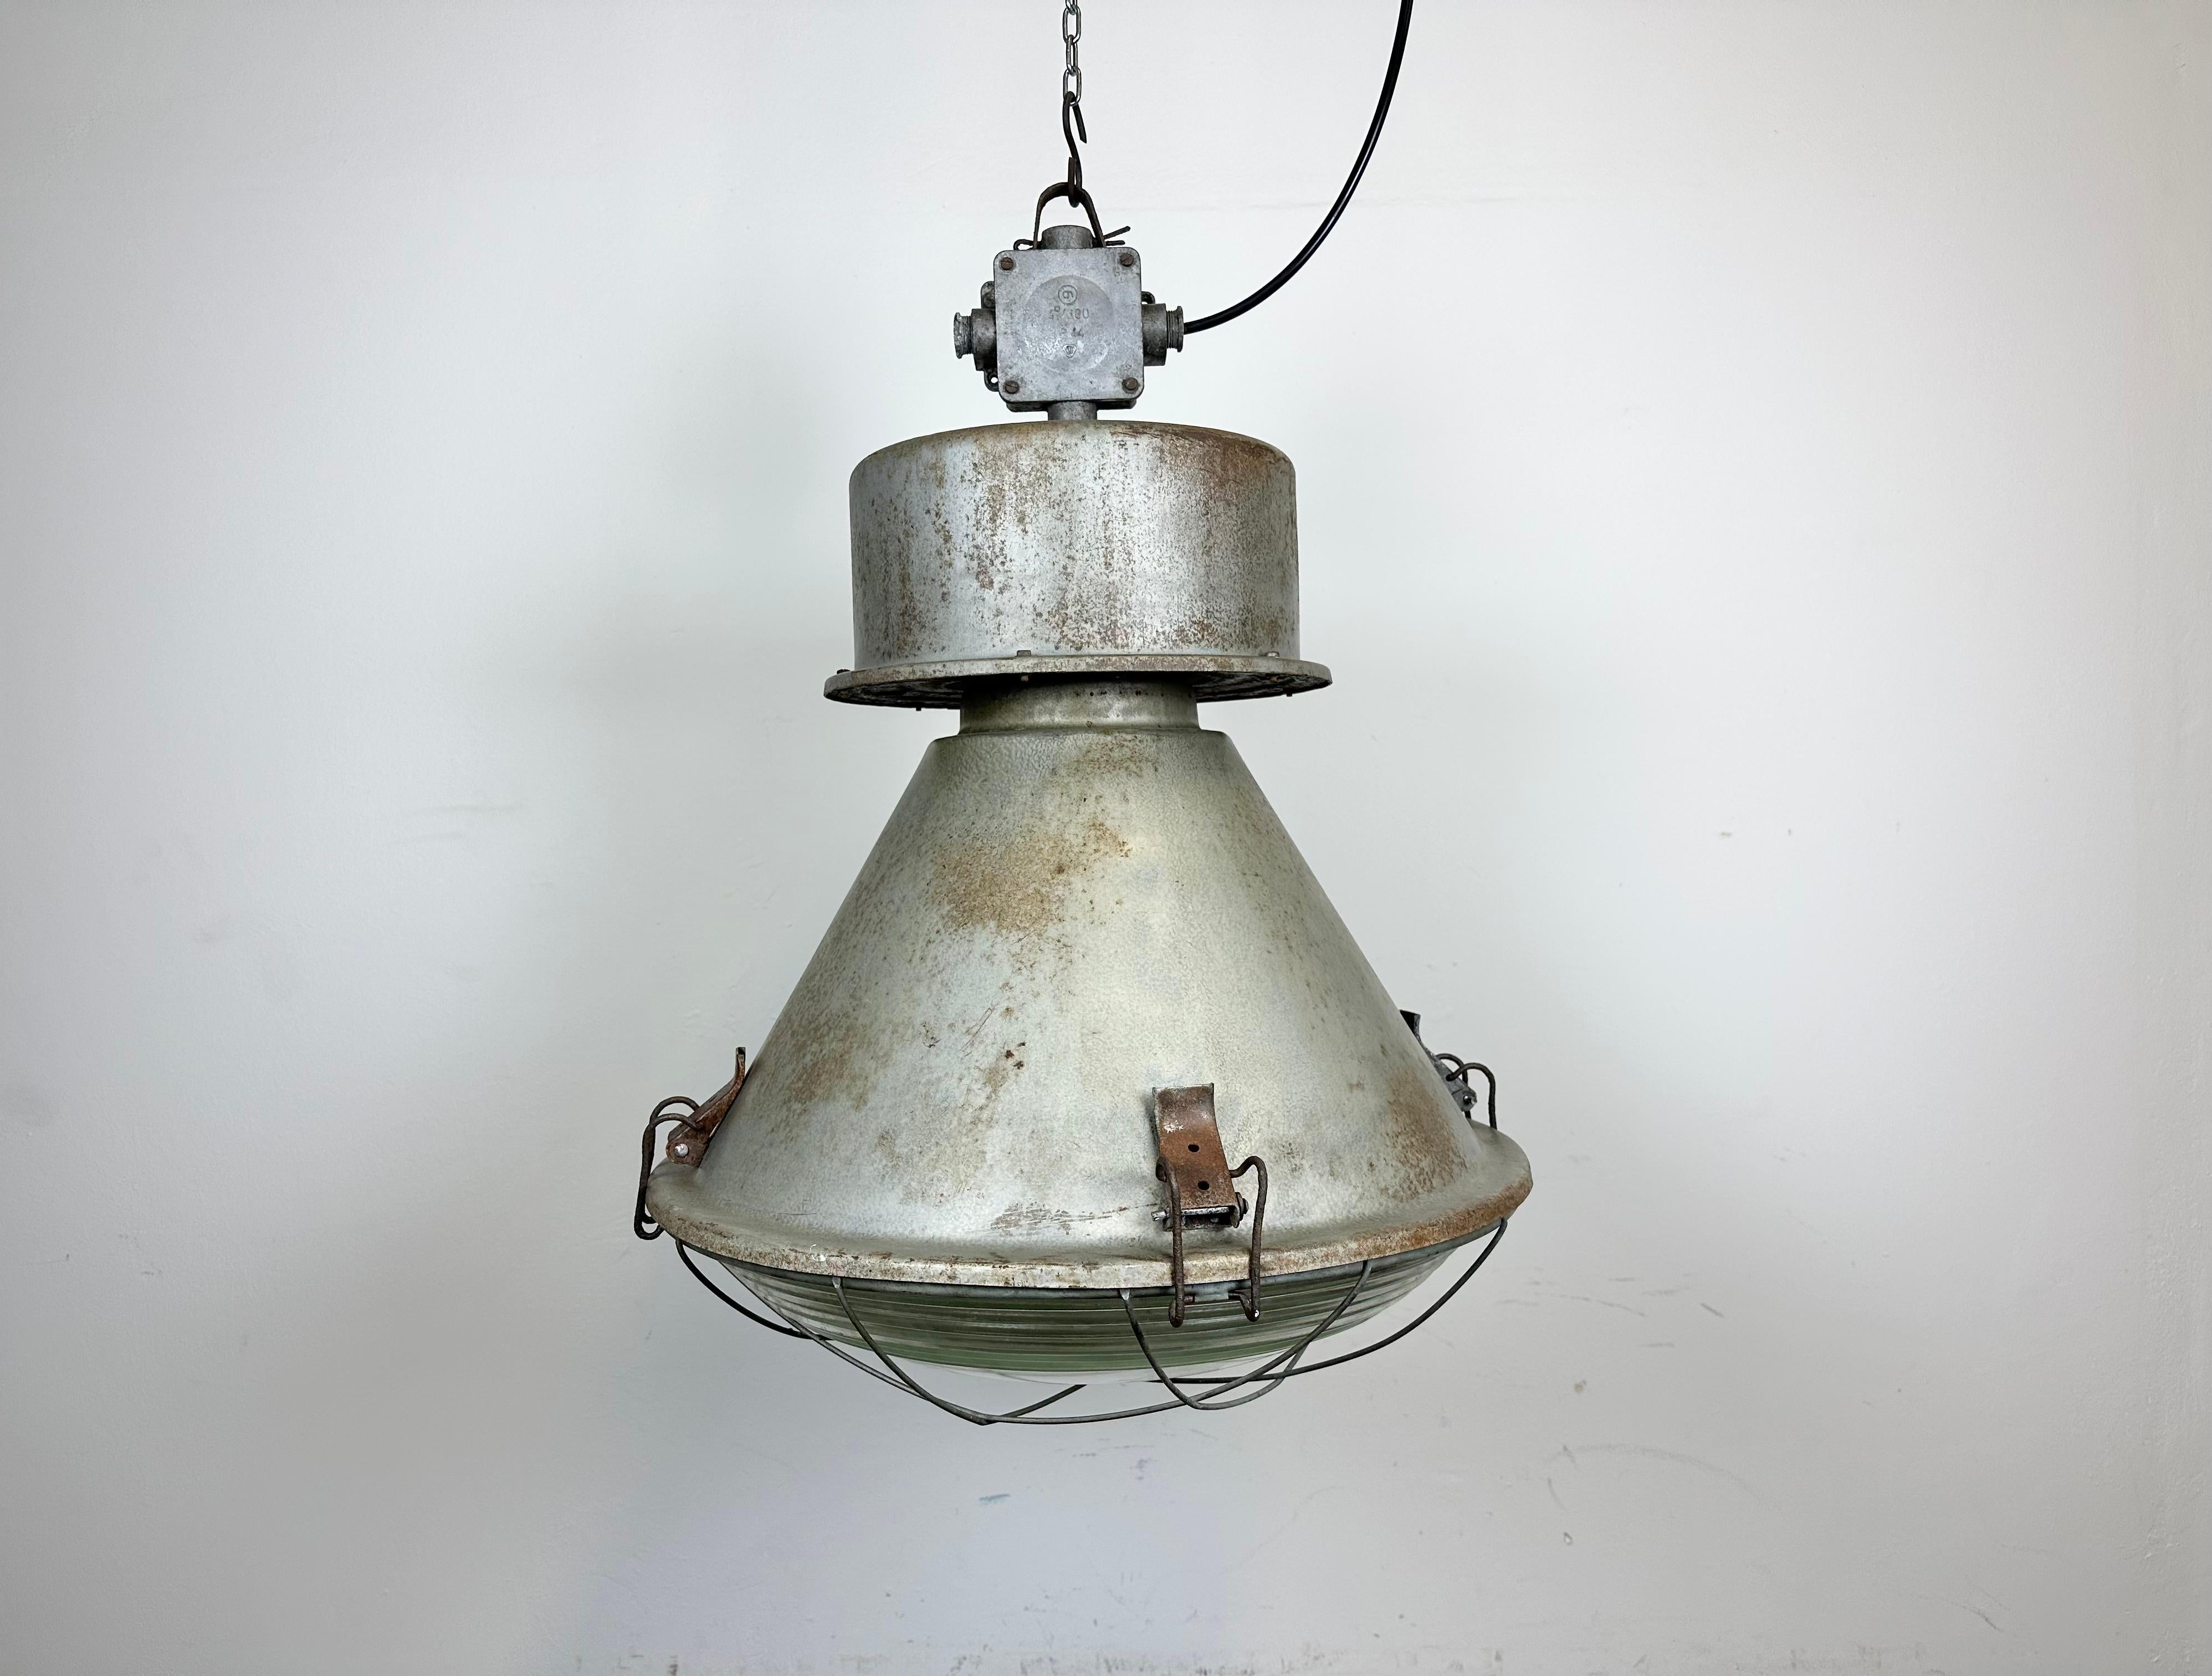 Vintage industrial hanging lamp manufactured in 1970s by MESKO in Skarzysko-Kamienna in Poland. It features a grey iron body, a cast aluminium top, iron grid and clear glass cover. The porcelain socket requires E 27/ E26 light bulbs. New wire. The